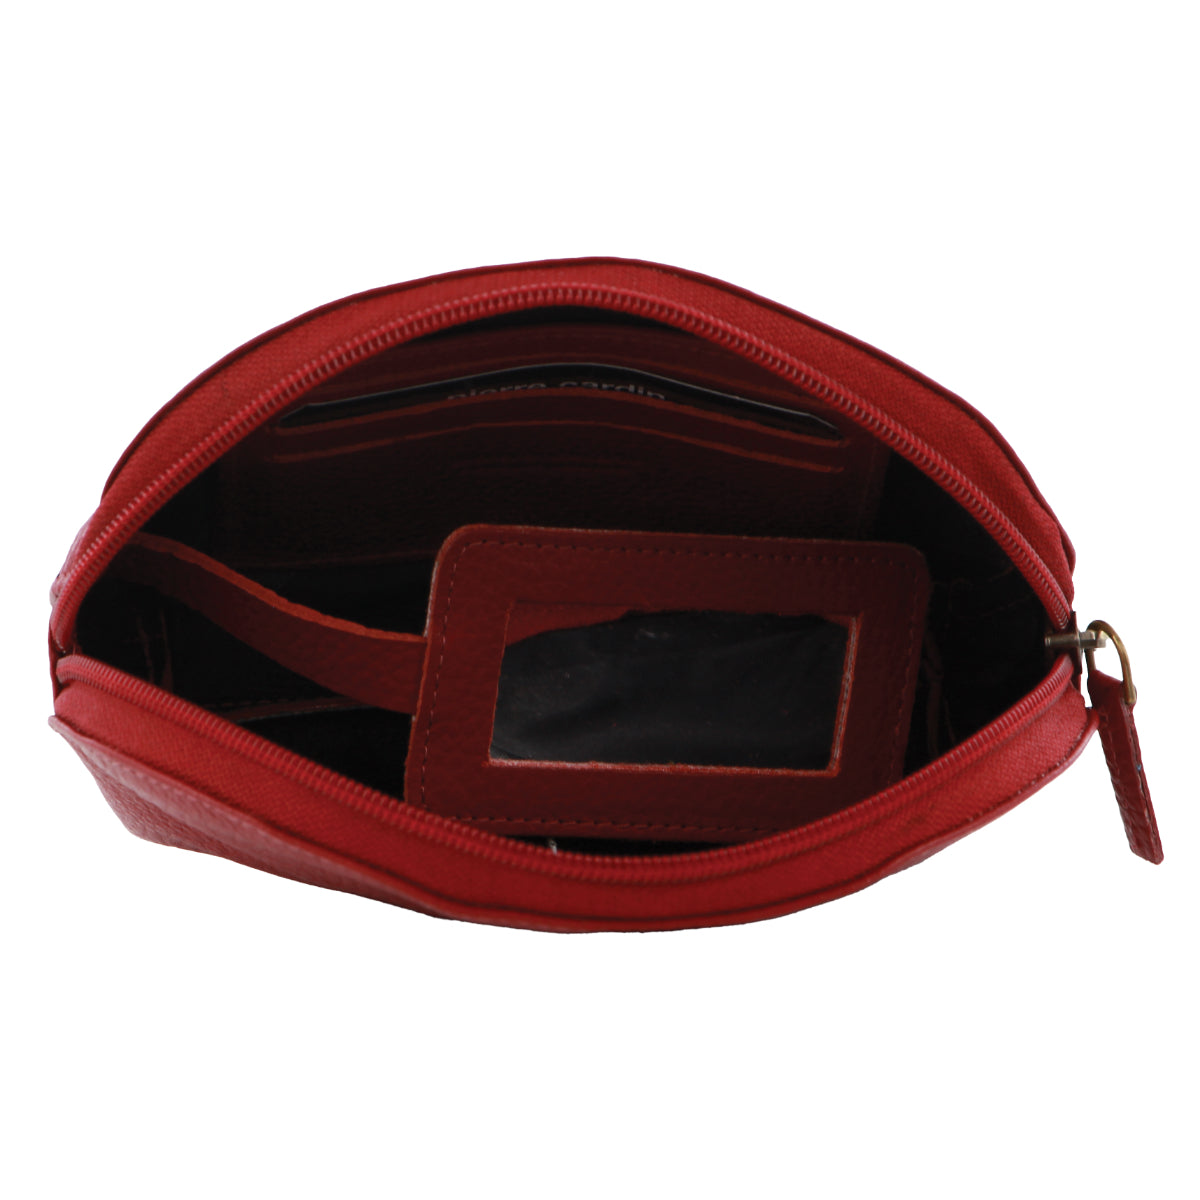 Pierre Cardin Leather Ladies Coin Purse in Red